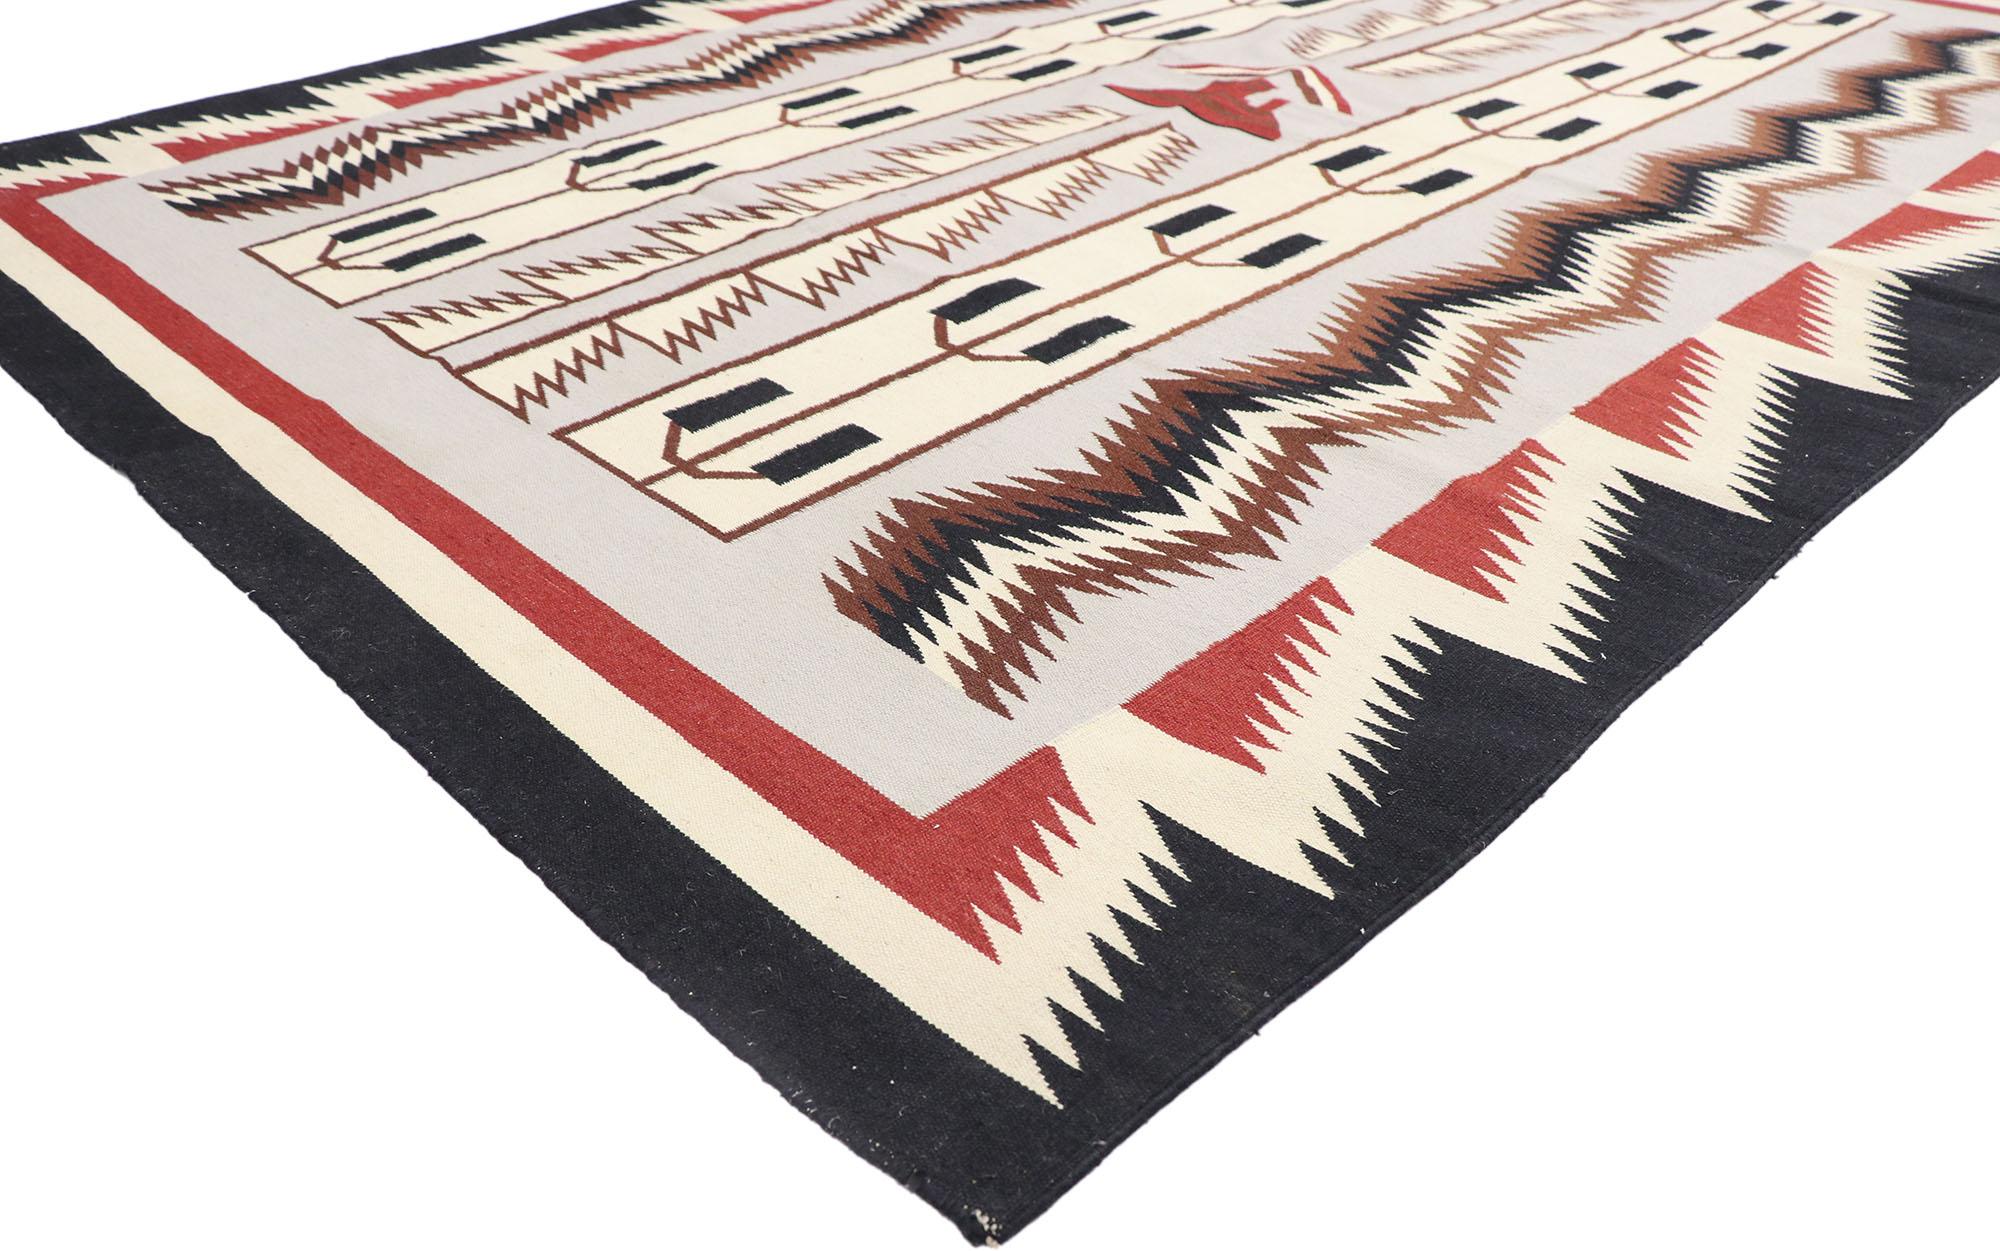 77922, vintage Romanian Kilim rug with Two Grey Hills Tribal style. With its bold expressive design, incredible detail and texture, this hand-woven wool vintage Romanian Kilim rug is a captivating vision of woven beauty highlighting tribal style